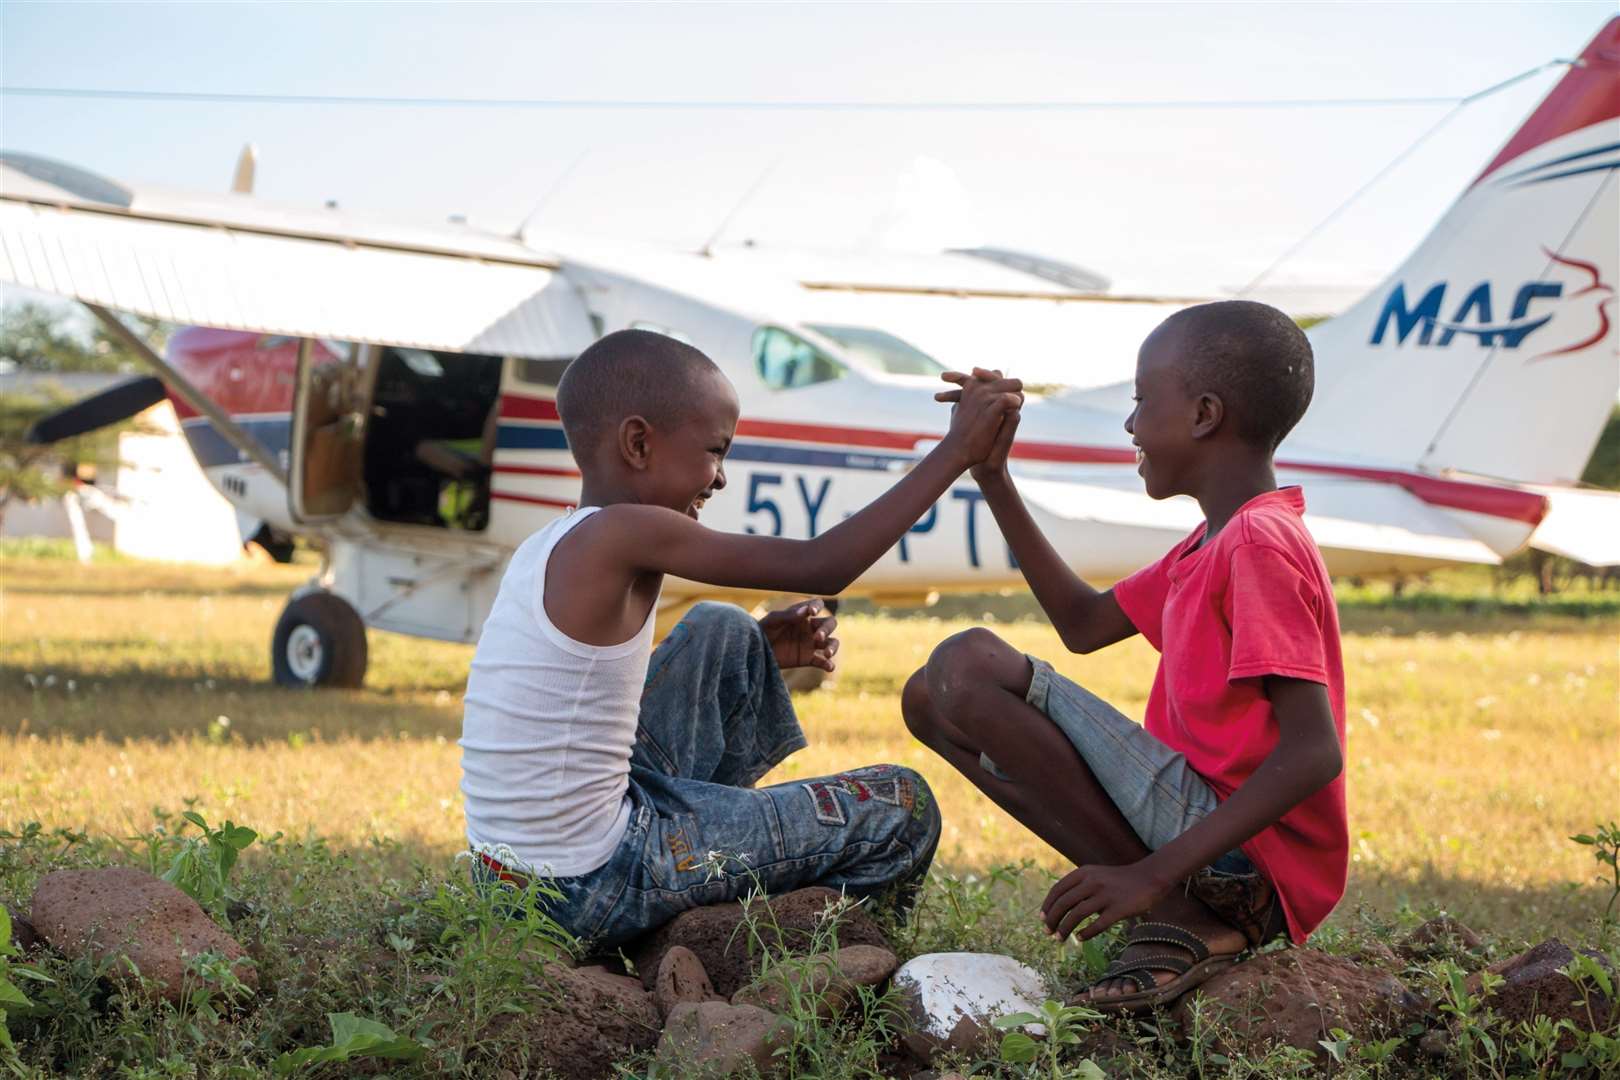 Mission Aviation Fellowship helps people in some of the hardest-to-reach places on earth.